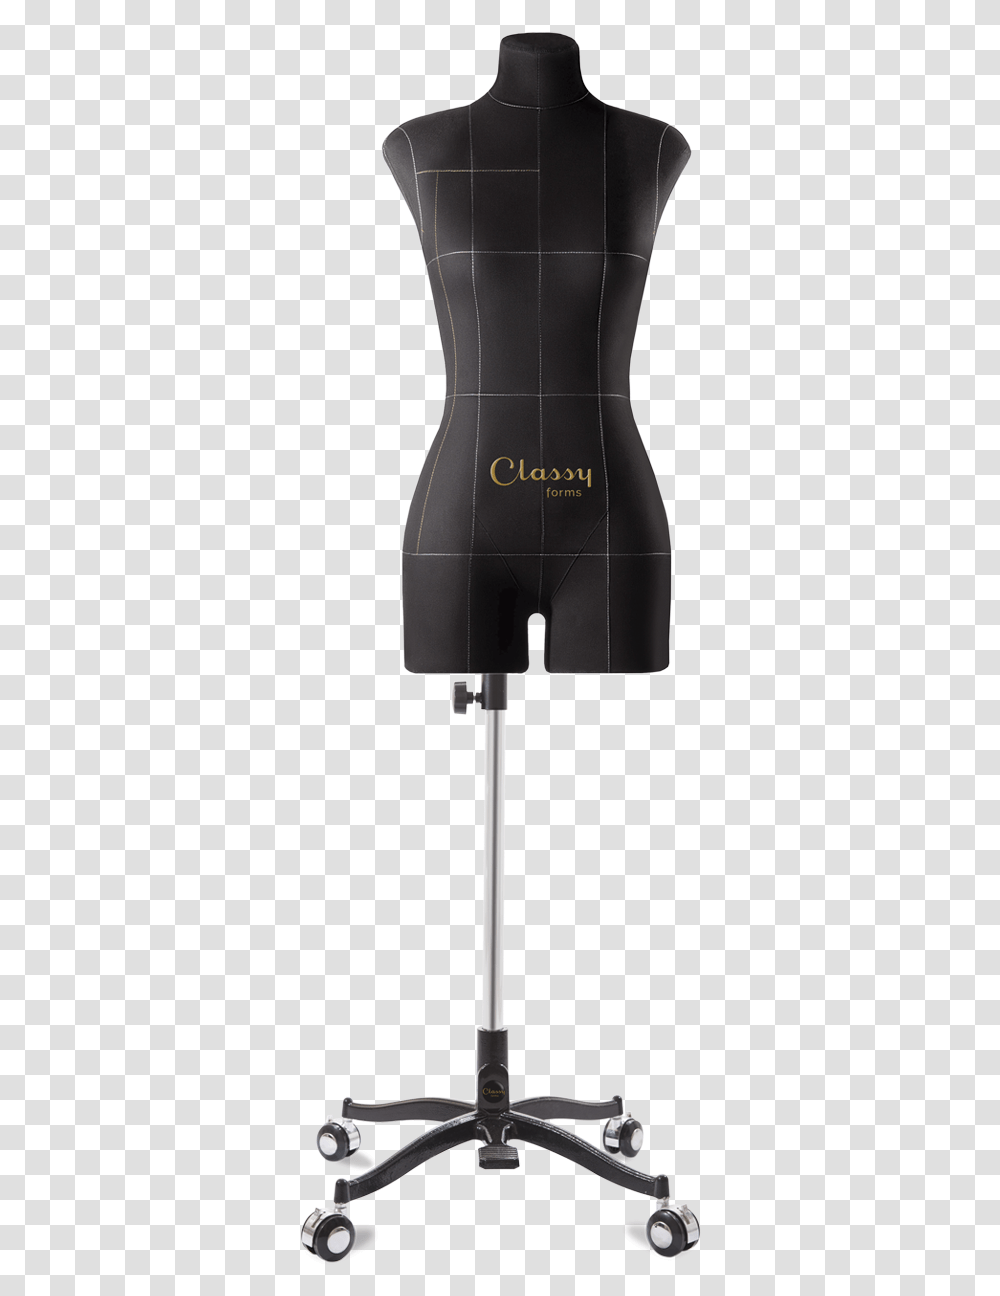 Mannequin Dress Form Clothing Tailor Pin Classy Forms, Label, Lamp, Shorts Transparent Png